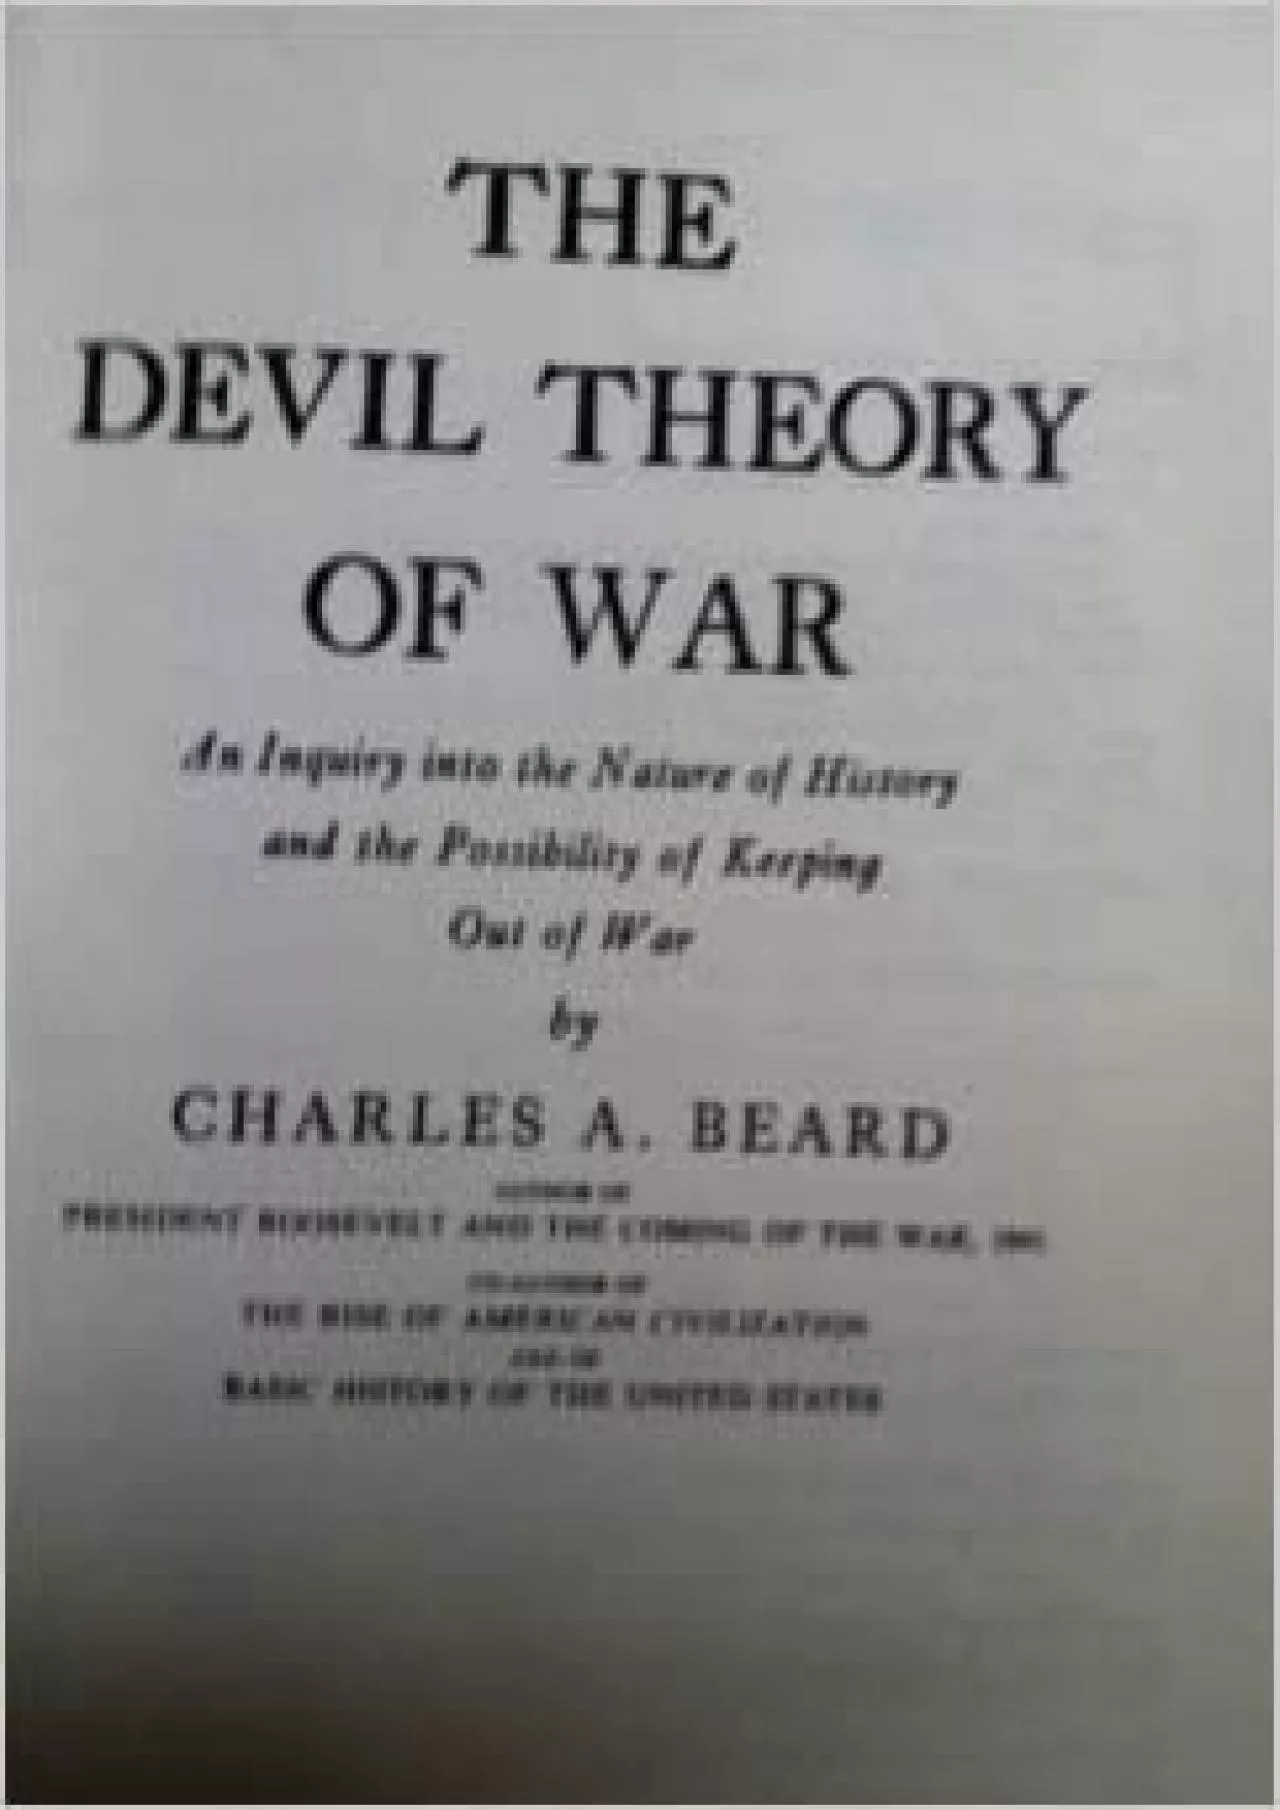 The Devil Theory of War: An Inquiry into the Nature of History and the Possibility of